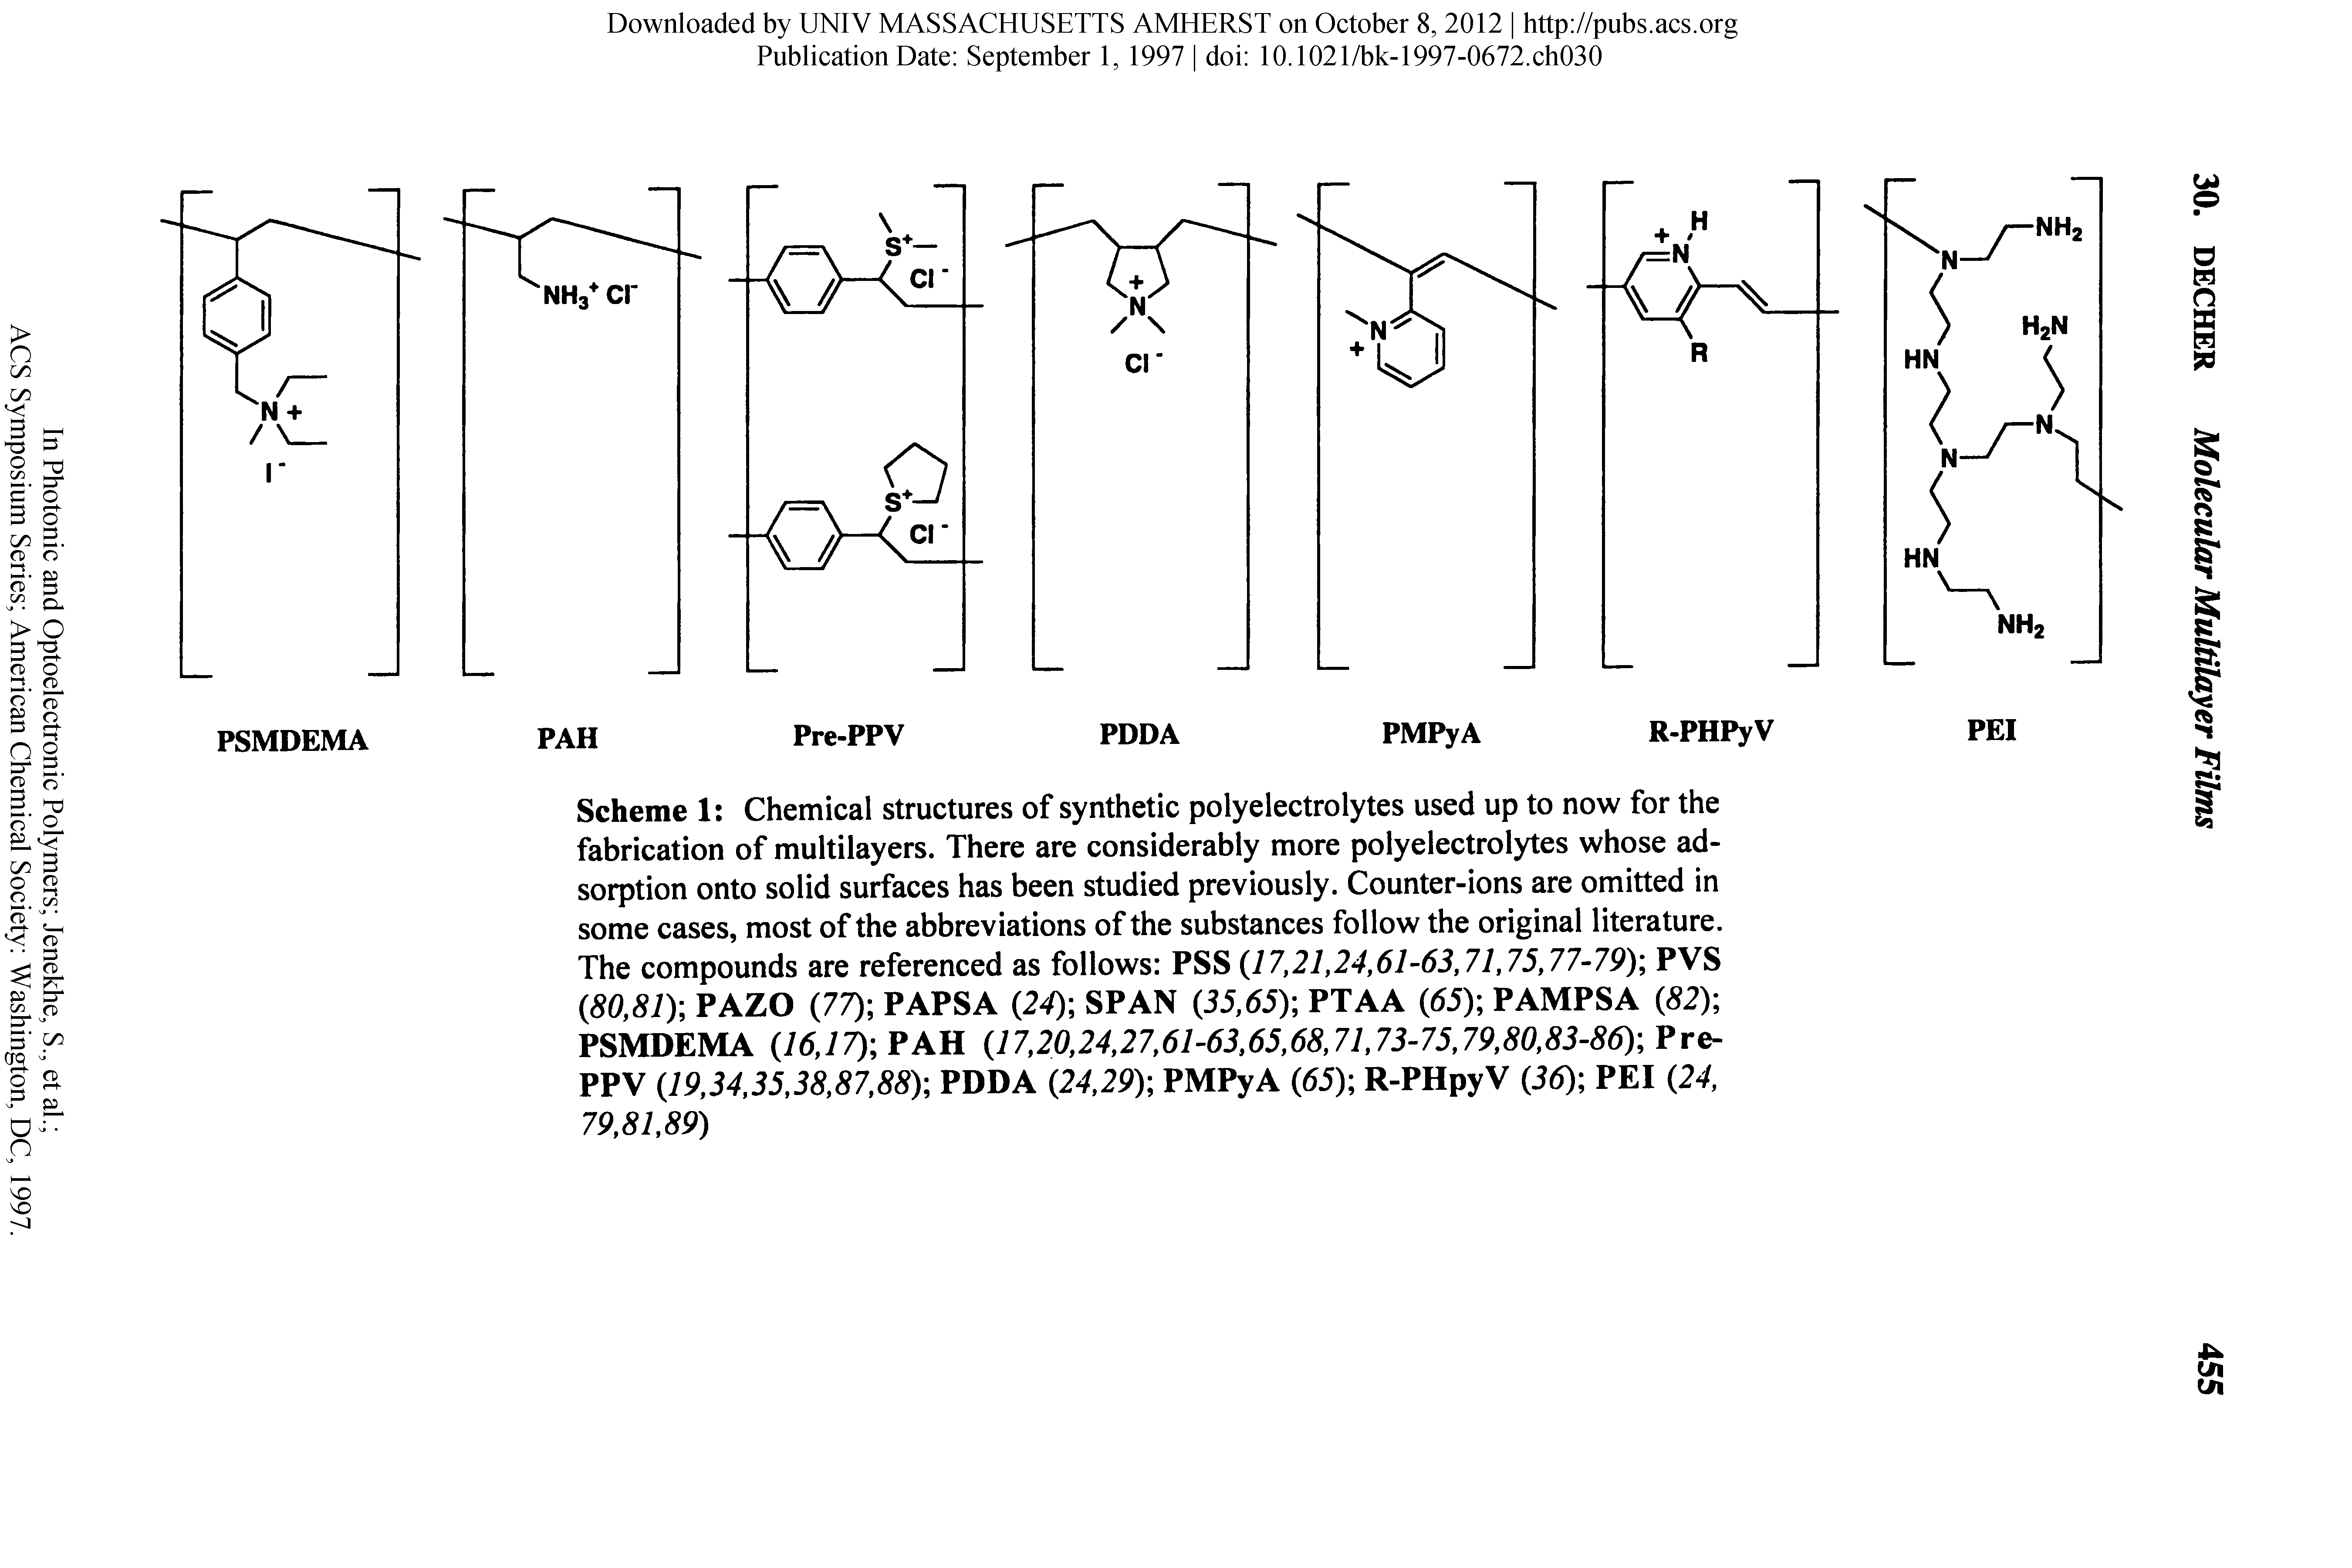 Scheme 1 Chemical structures of synthetic polyelectrolytes used up to now for the fabrication of multilayers. There are considerably more polyelectrolytes whose adsorption onto solid surfaces has been studied previously. Counter-ions are omitted in some cases, most of the abbreviations of the substances follow the original literature. The compounds are referenced as follows PSS (17,21,24,61-63,71,75,77-79) PVS (80,81) PAZO (77) PAPSA (24) SPAN (35,65) PTAA (65) PAMPSA (82) PSMDEMA (7(5,77) PAH (17,20,24,27,61-63,65,68,71,73-75,79,80,83-86) l re-PPV (19,34,35,38,87,88) PDDA (24,29) PMPyA (65) R-PHpyV (36) PEI (24, 79,81,89)...